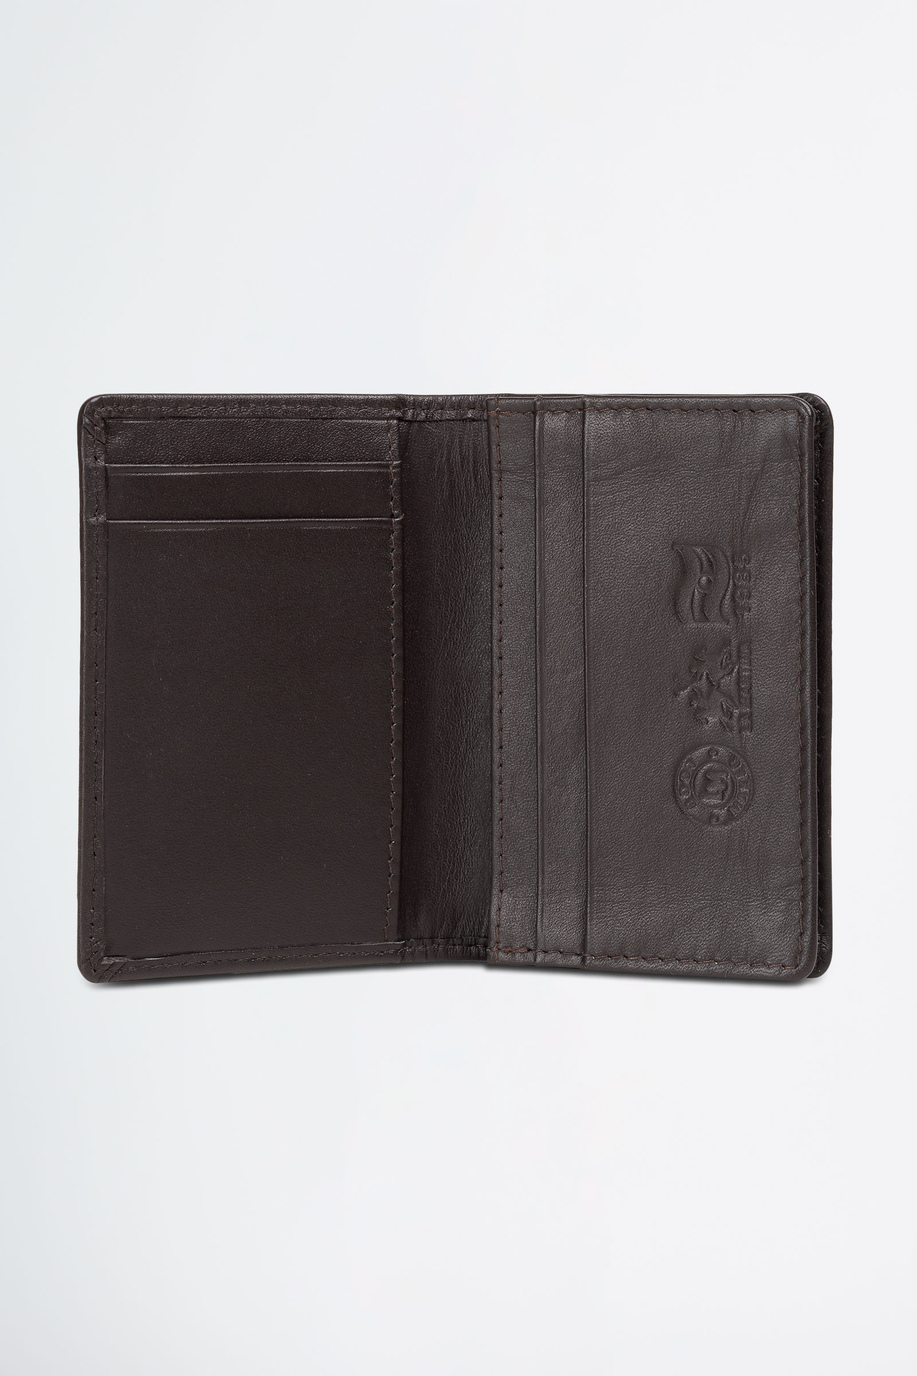 Leather ticket holder - Accessories | La Martina - Official Online Shop